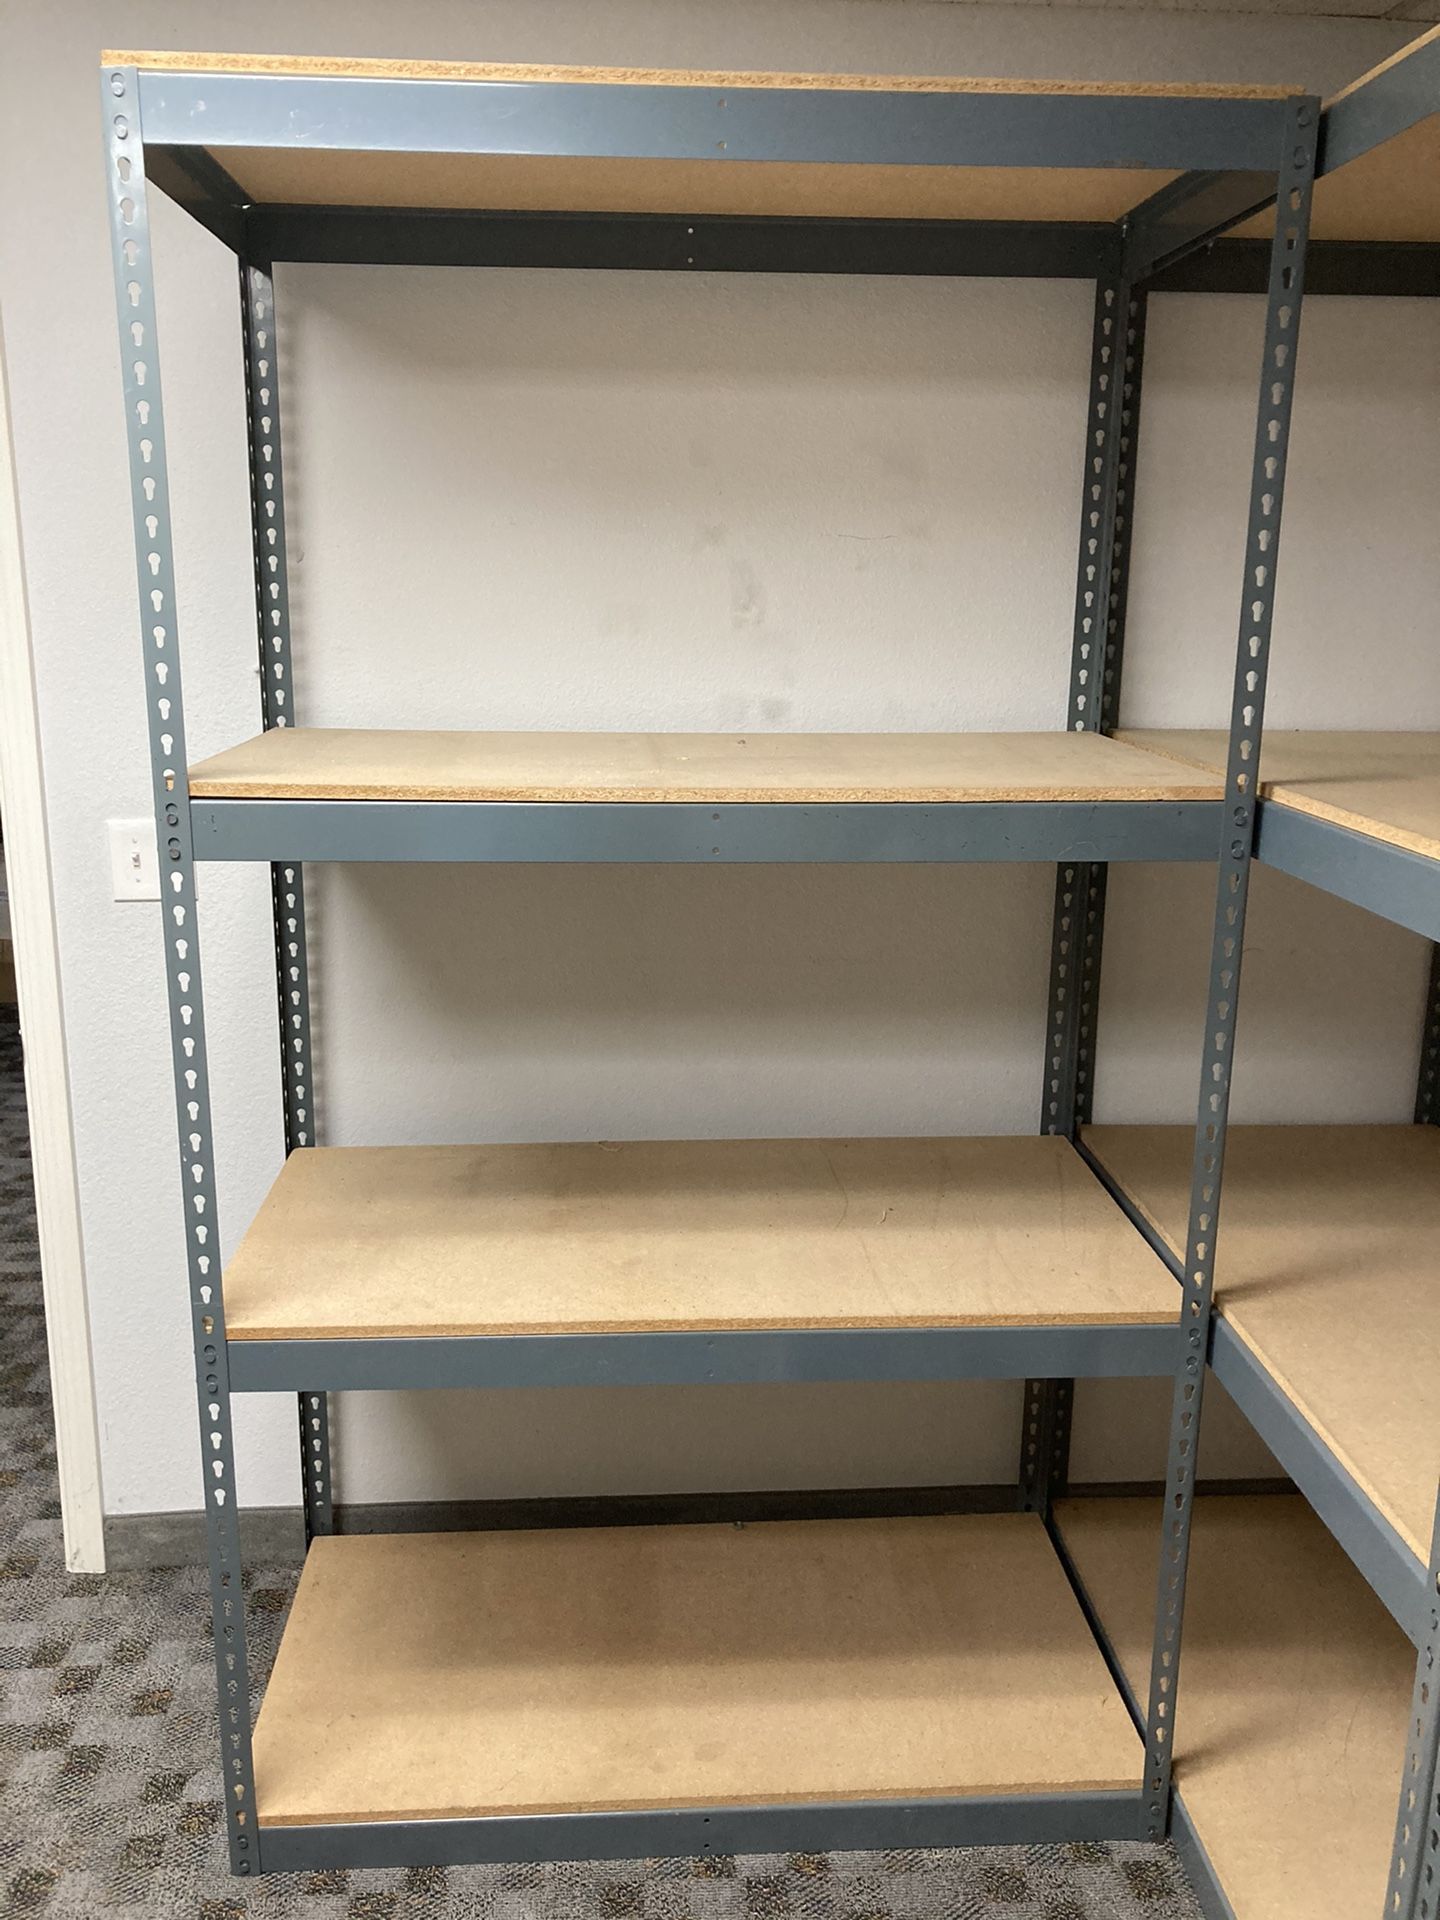 Shelving - Free Standing - Fully Adjustable